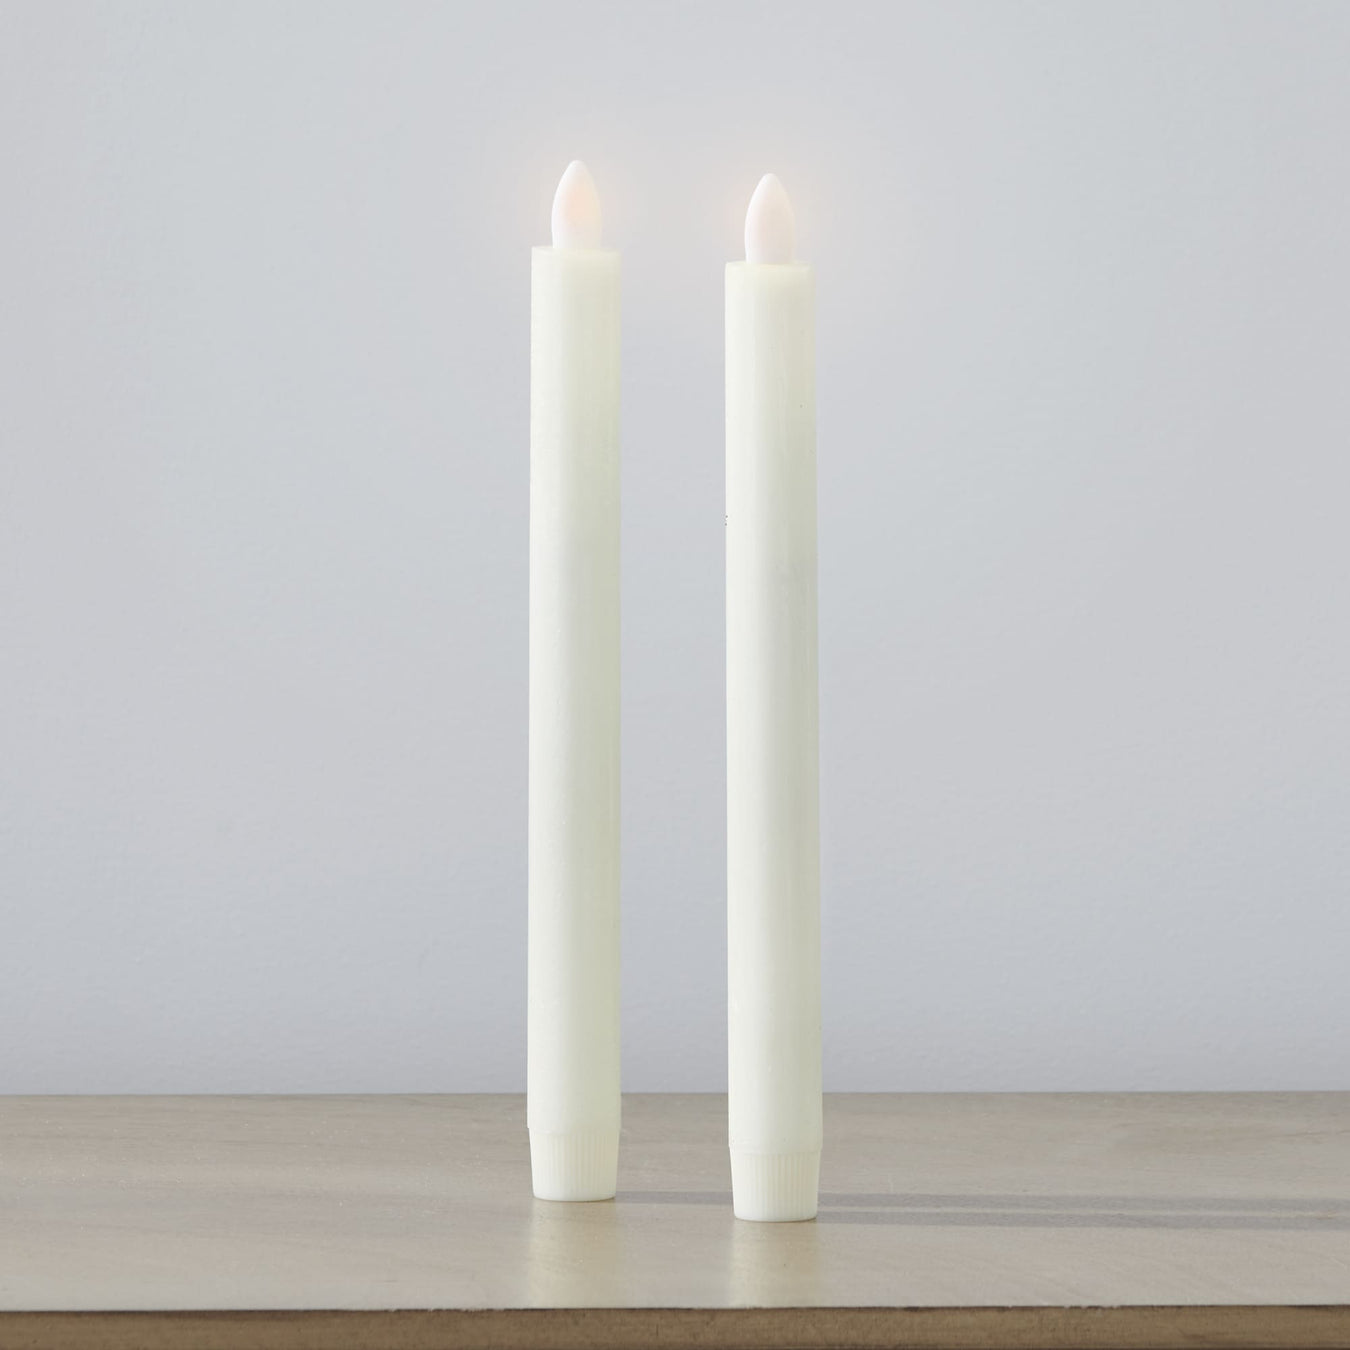 Signature HomeStyles Candles Ivory Flameless Taper Candle 2-pc set